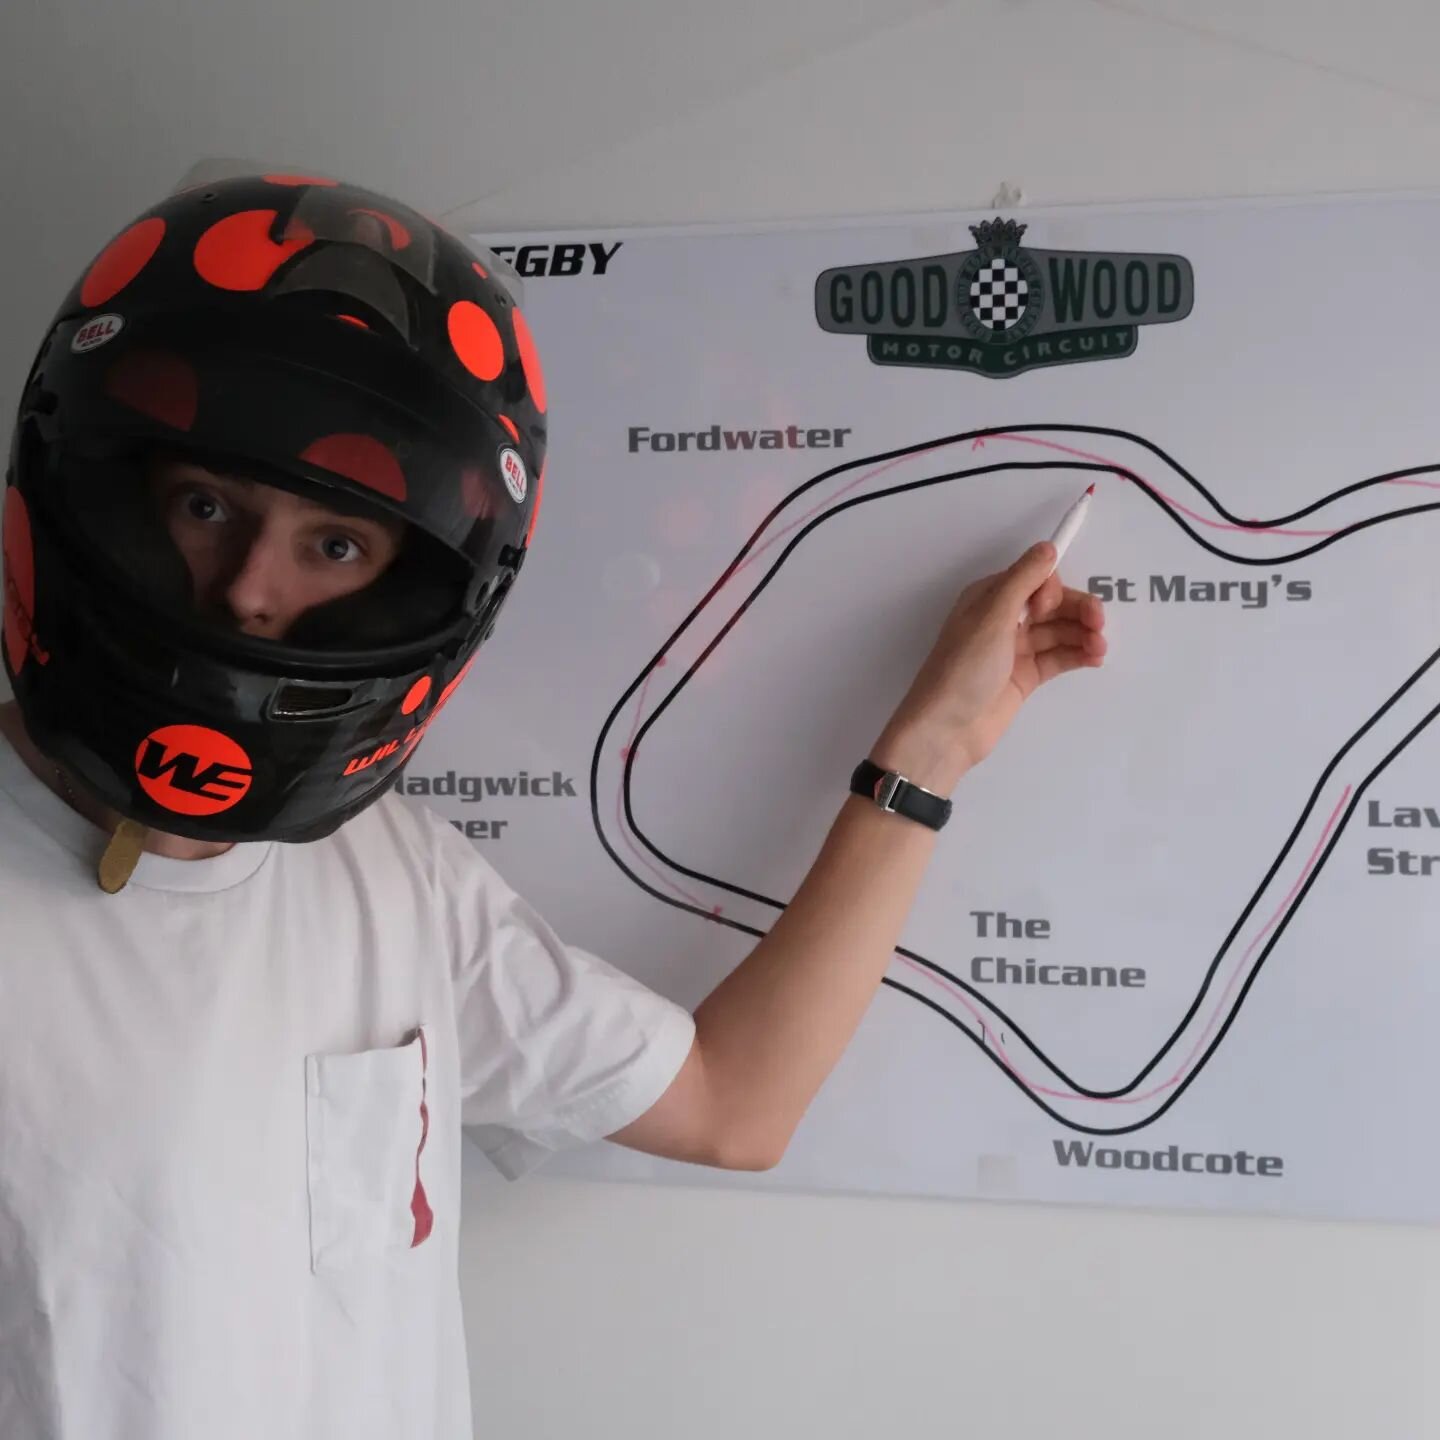 NEW VIDEO LIVE! LINK IN BIO. 
&nbsp;
This is the last Goodwood Track Guide that you will ever need to watch. I provide detailed racing lines, best techniques and talk about the strategies in different grip-level cars. This makes it the perfect guide 